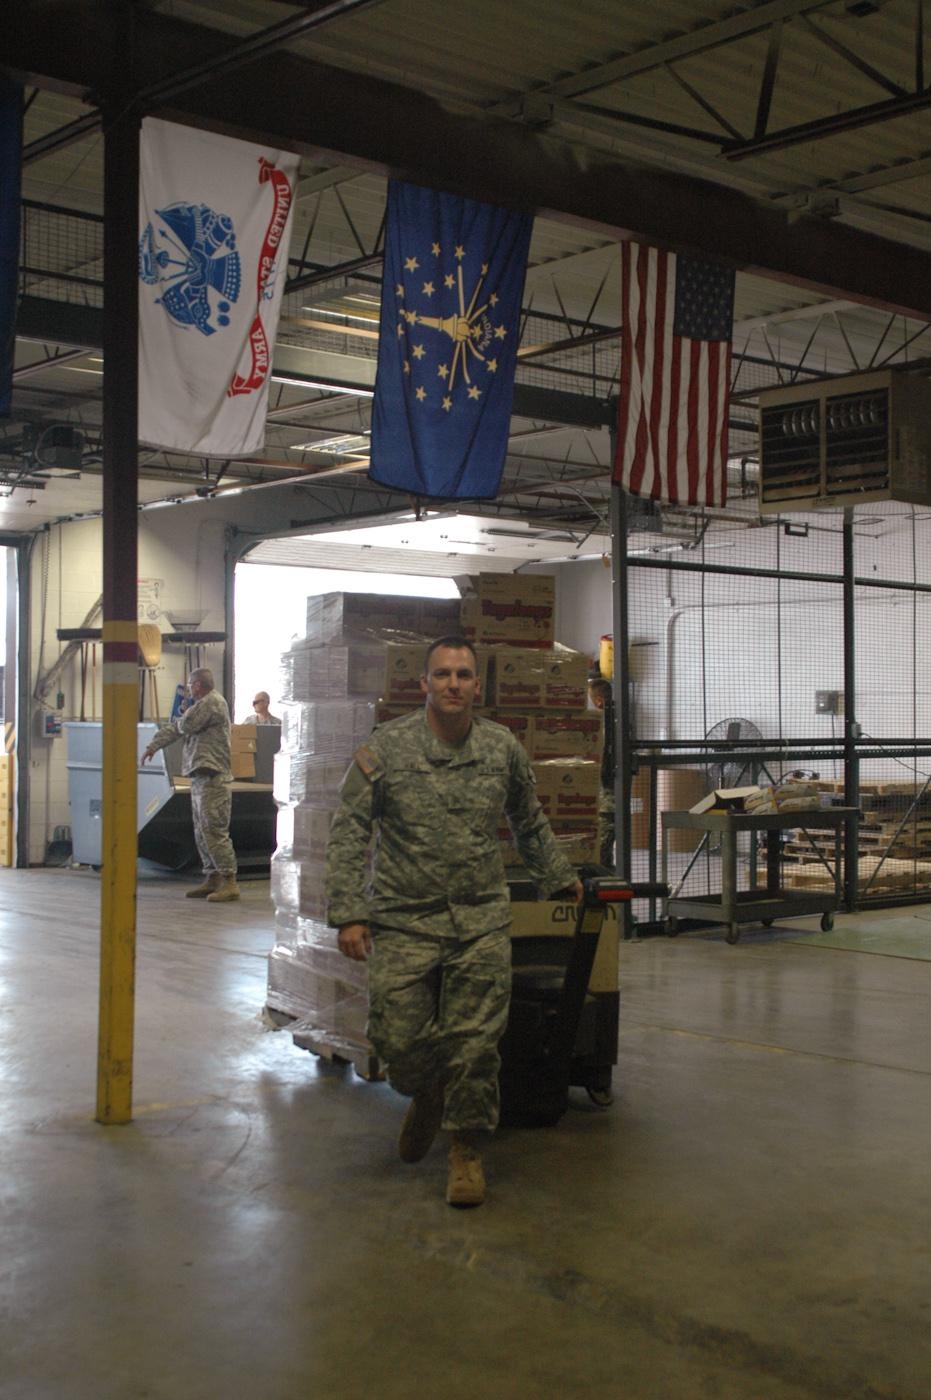 Girl Scouts deliver cookies to troops at Camp Atterbury